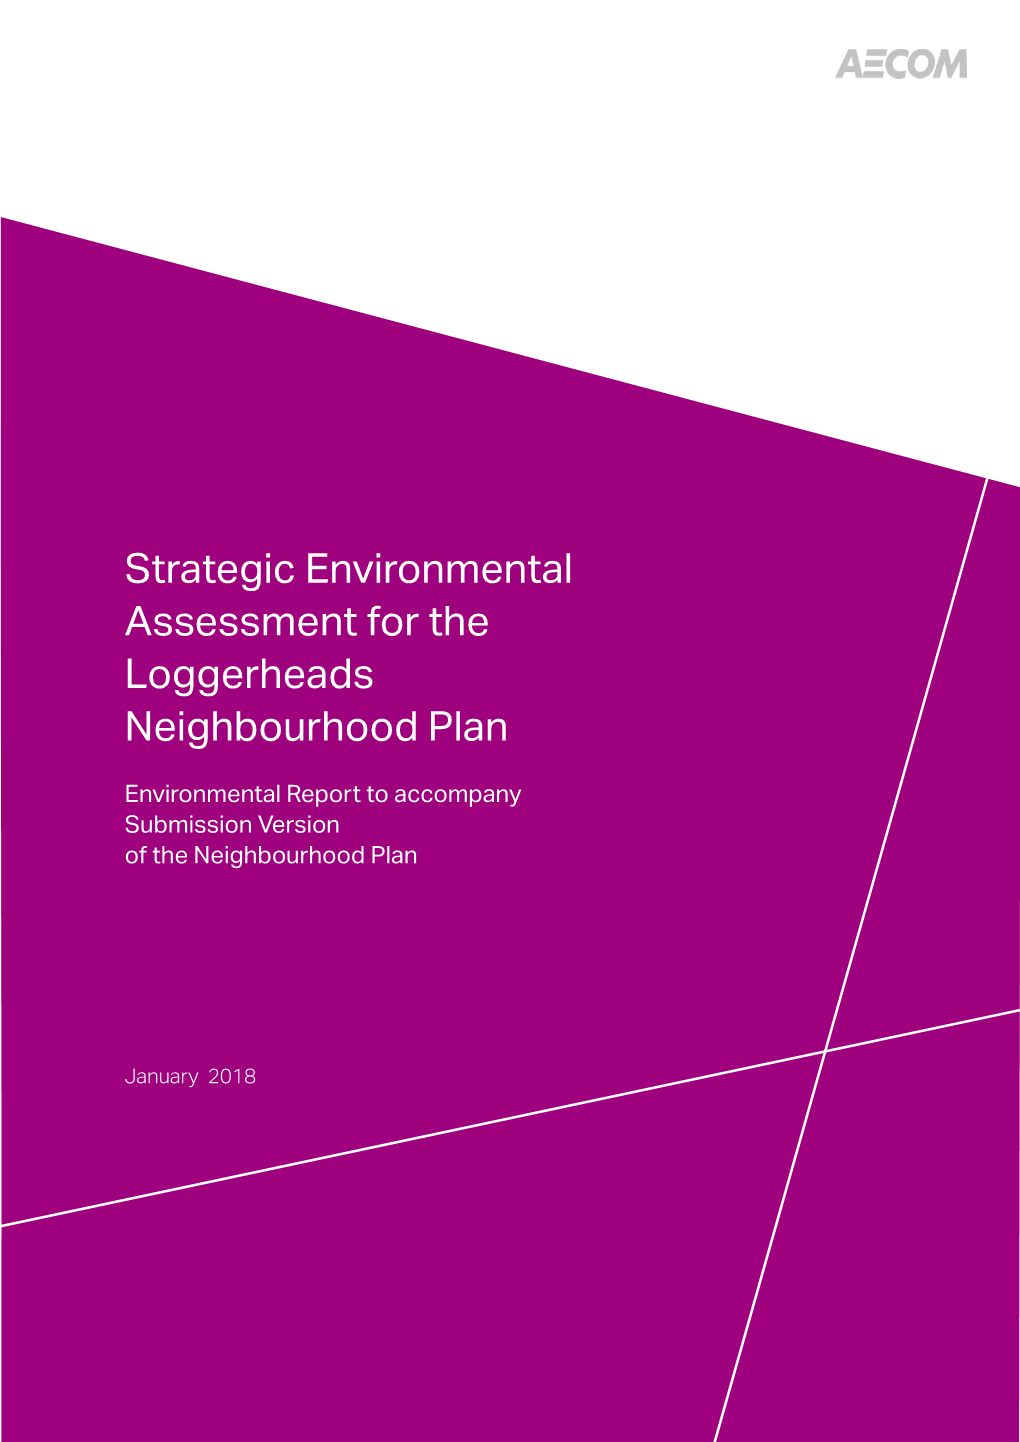 Strategic Environmental Assessment for the Loggerheads Neighbourhood Plan Environmental Report to Accompany Submission Version of the Neighbourhood Plan